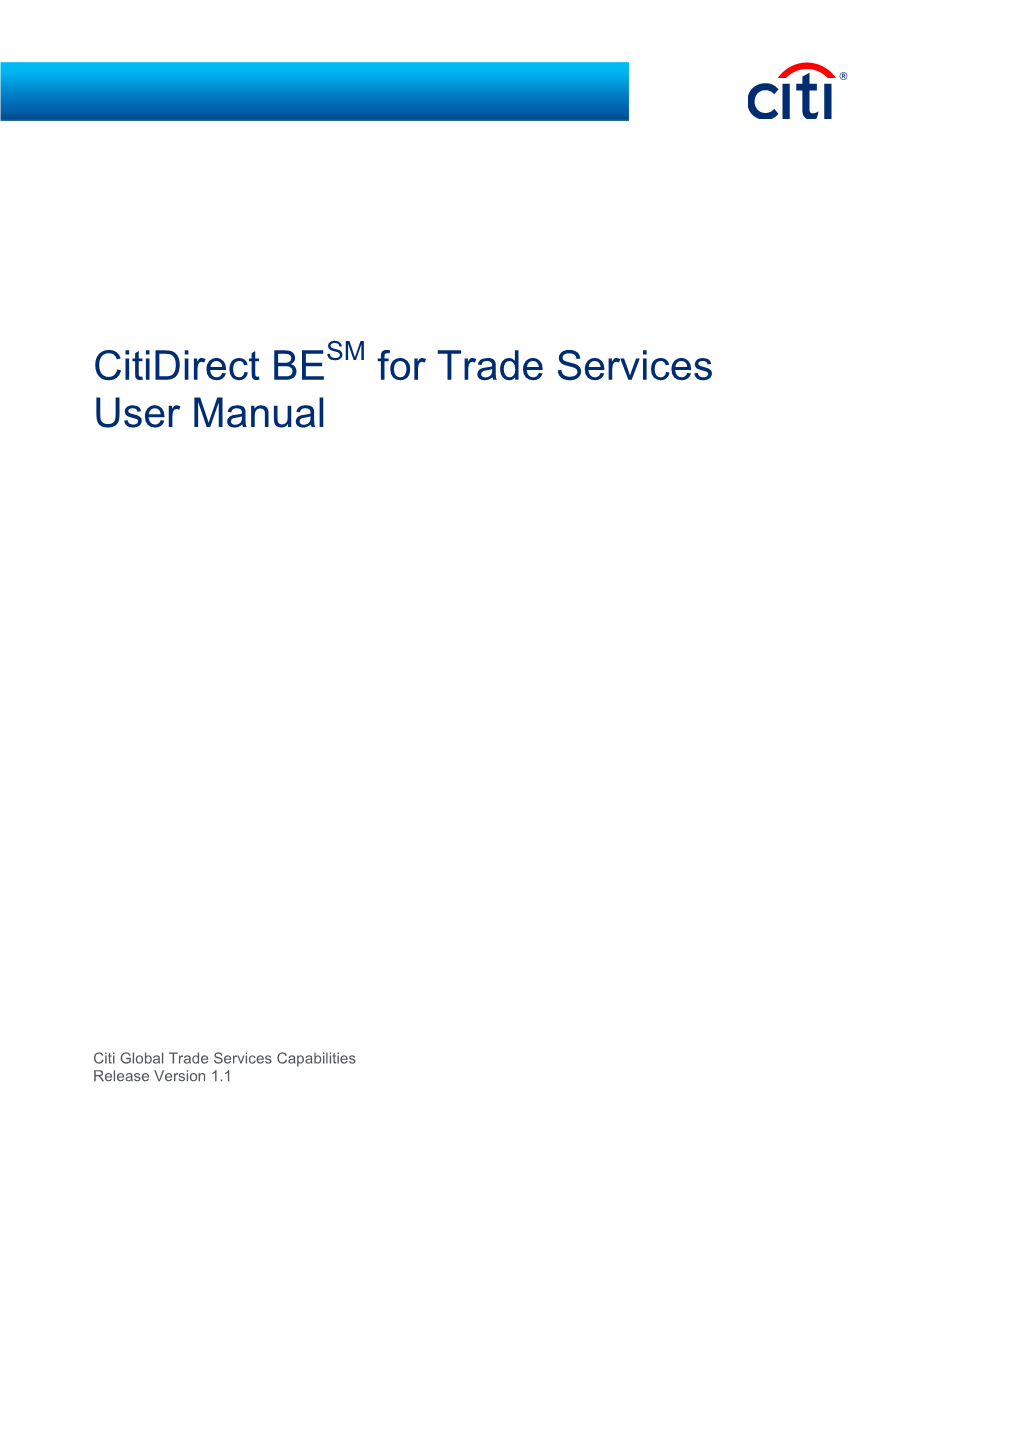 Citidirect BE for Trade Services